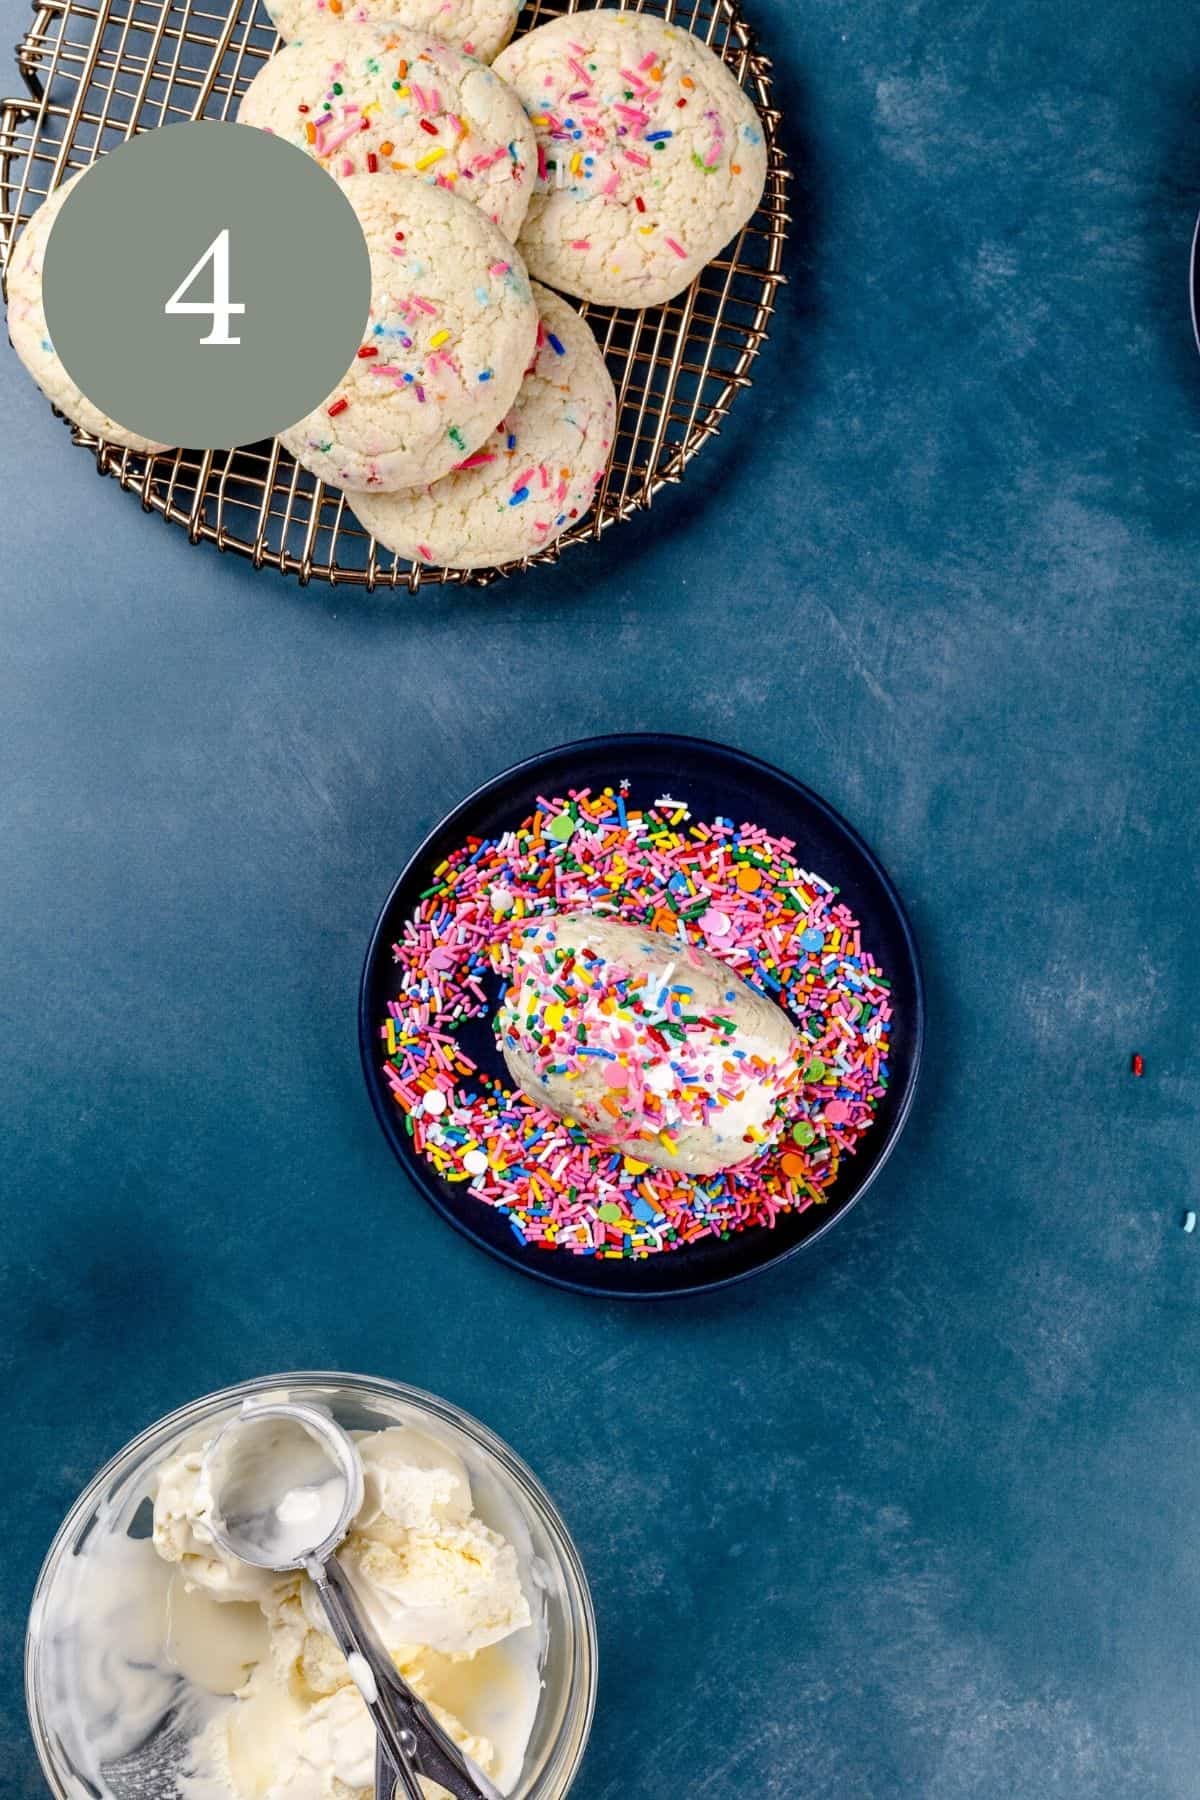 the finished confetti ice cream sandwich is being rolled on a plate filled with rainbow sprinkles while more cookies and a bowl of vanilla ice cream surround the cookies